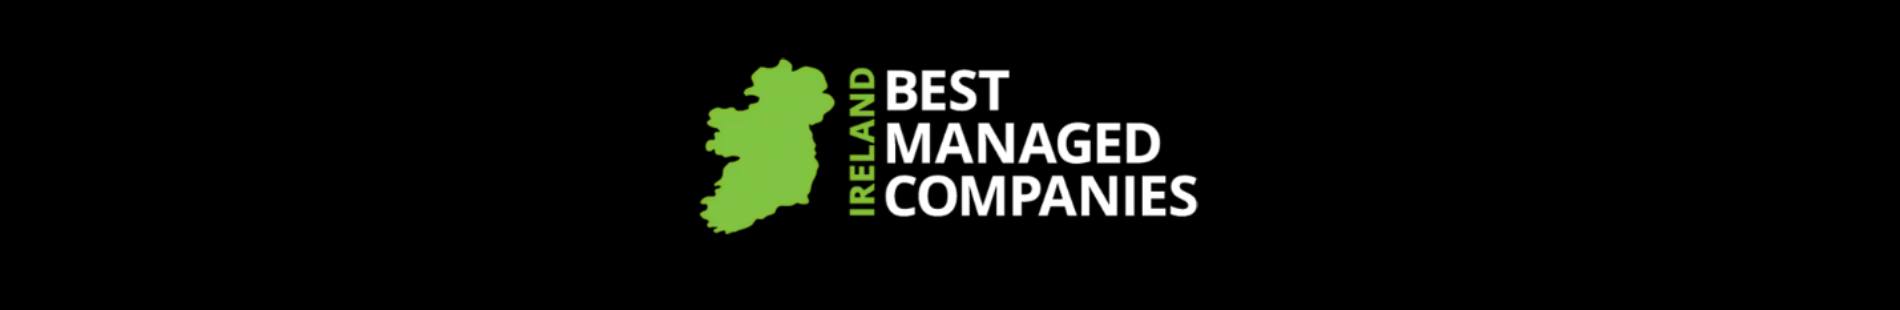 Ocuco Announced as one of Ireland's Best Managed Companies